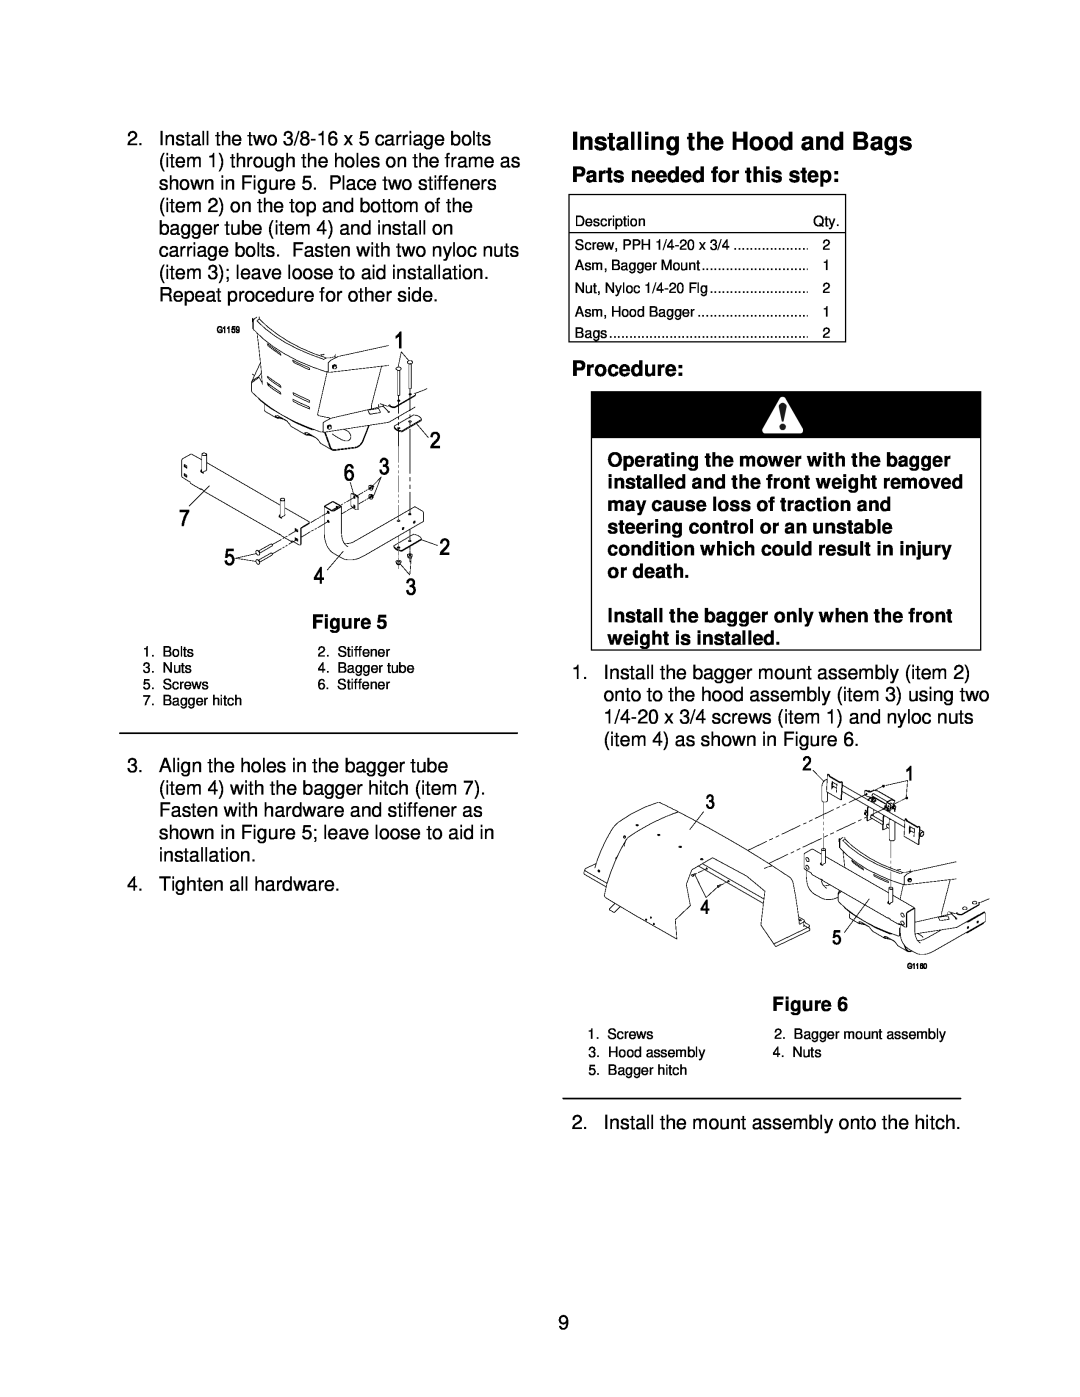 Exmark Quest Bagger manual Installing the Hood and Bags, Parts needed for this step, Procedure, Figure 